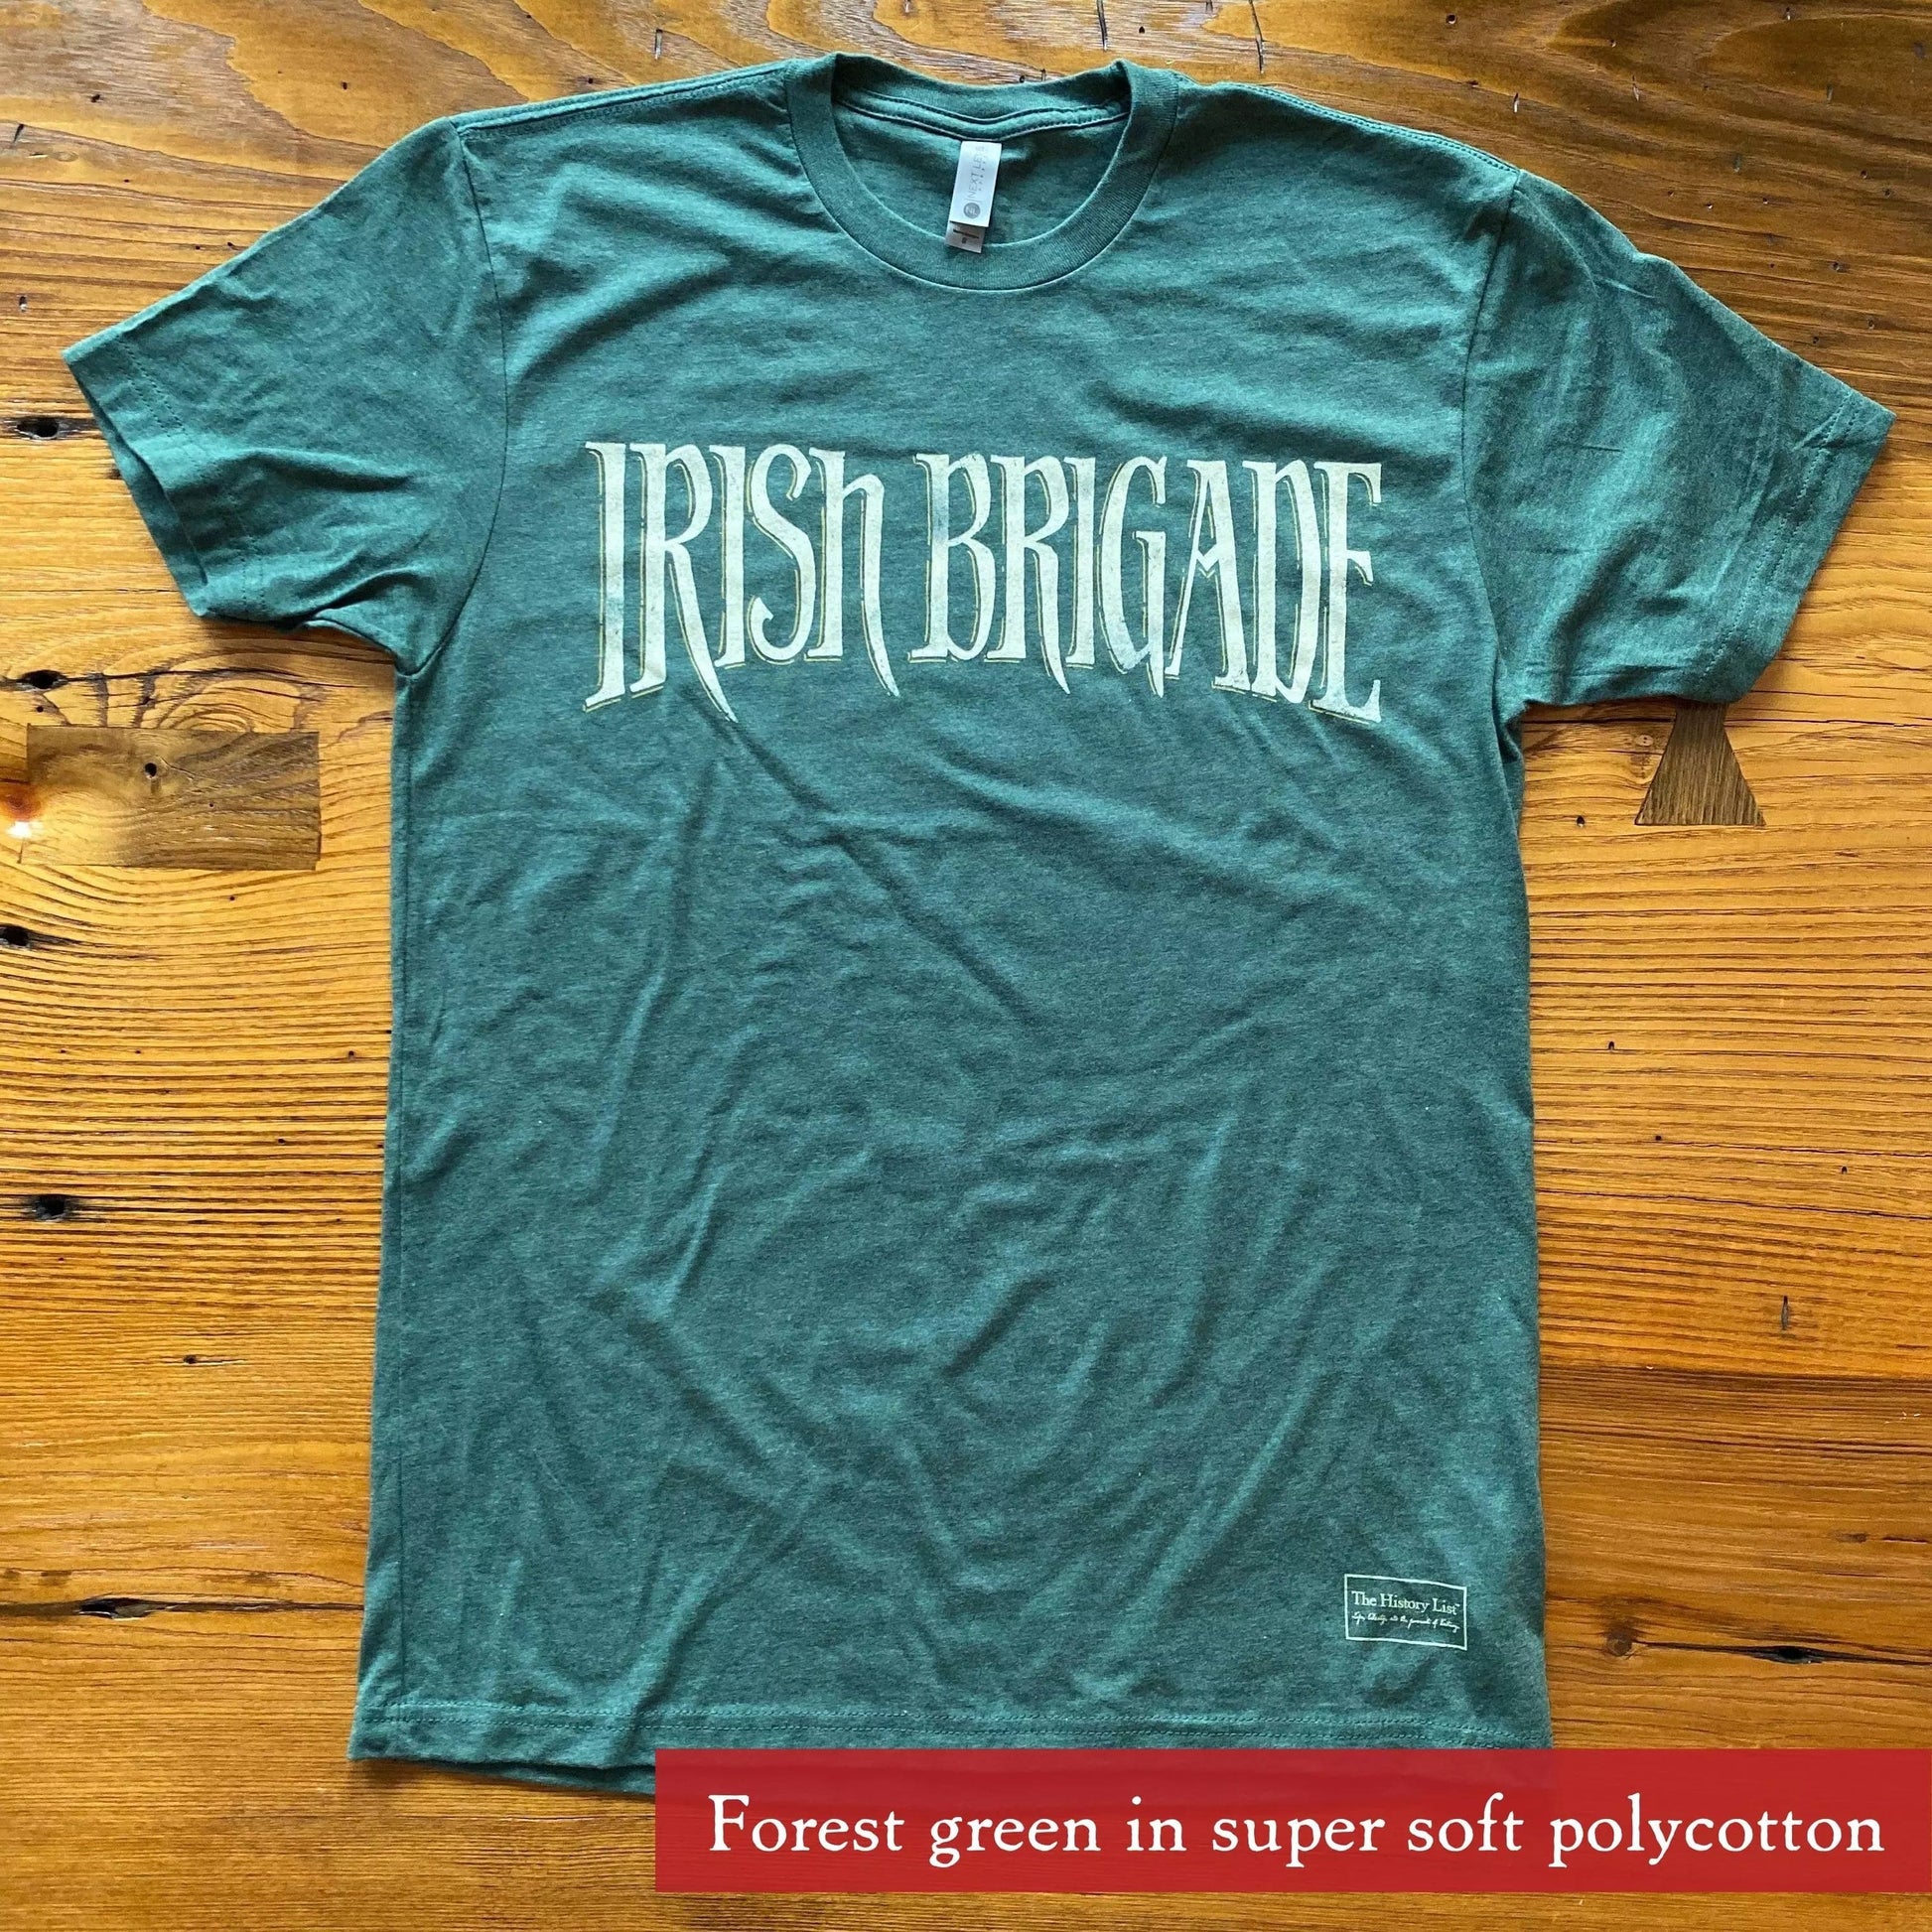 The Civil War "Irish Brigade" Shirt in Forest green from The History List store